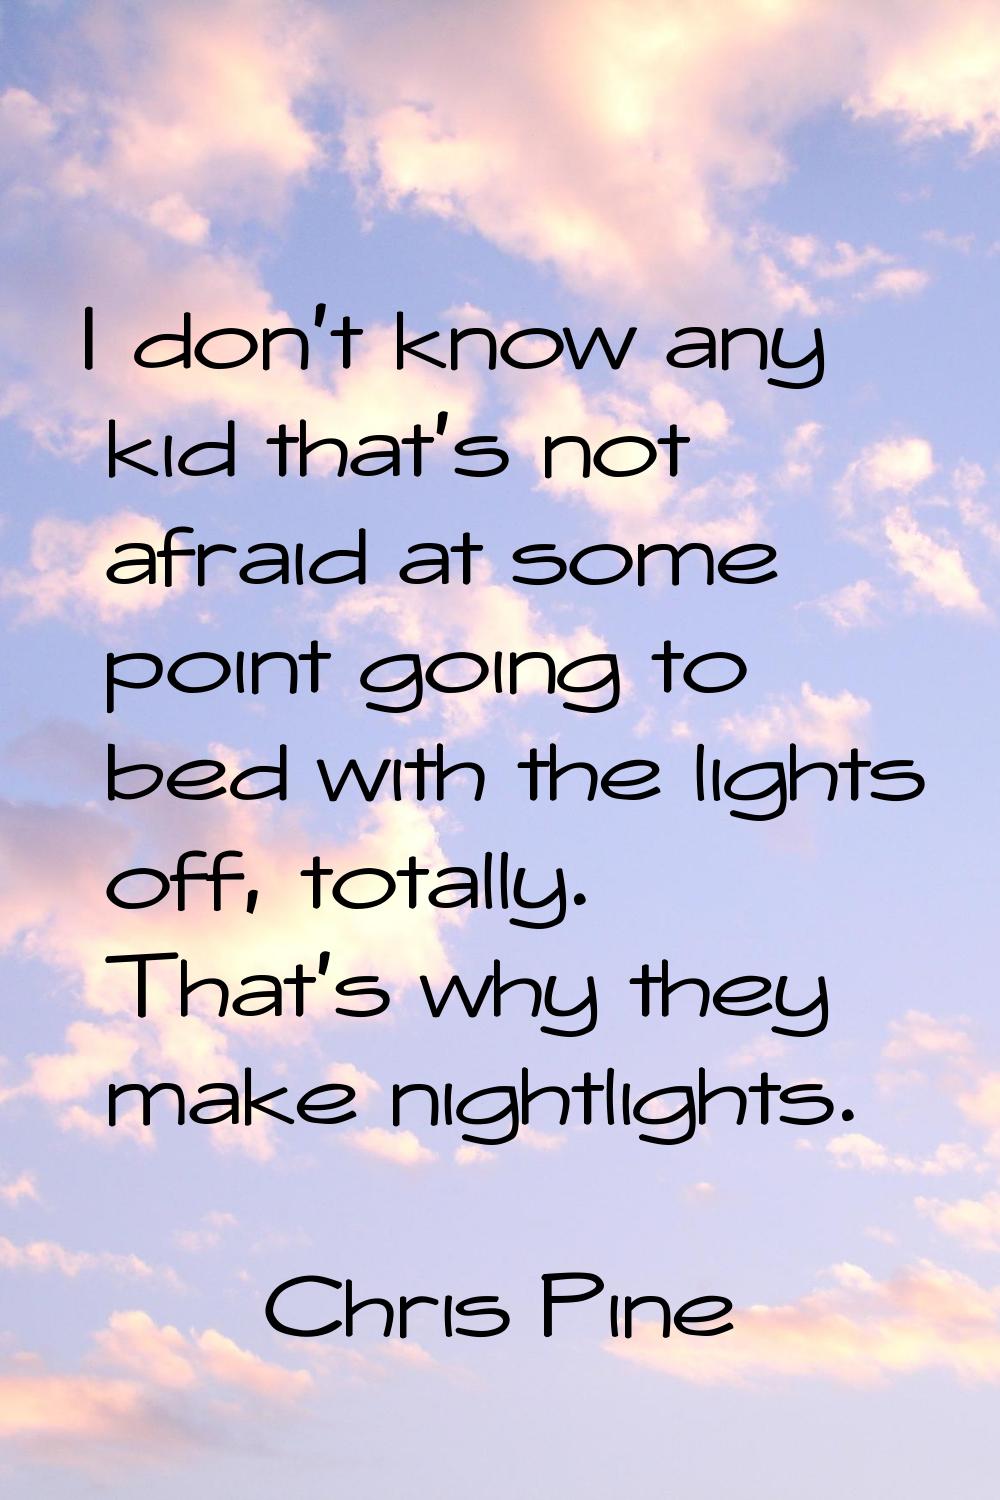 I don't know any kid that's not afraid at some point going to bed with the lights off, totally. Tha